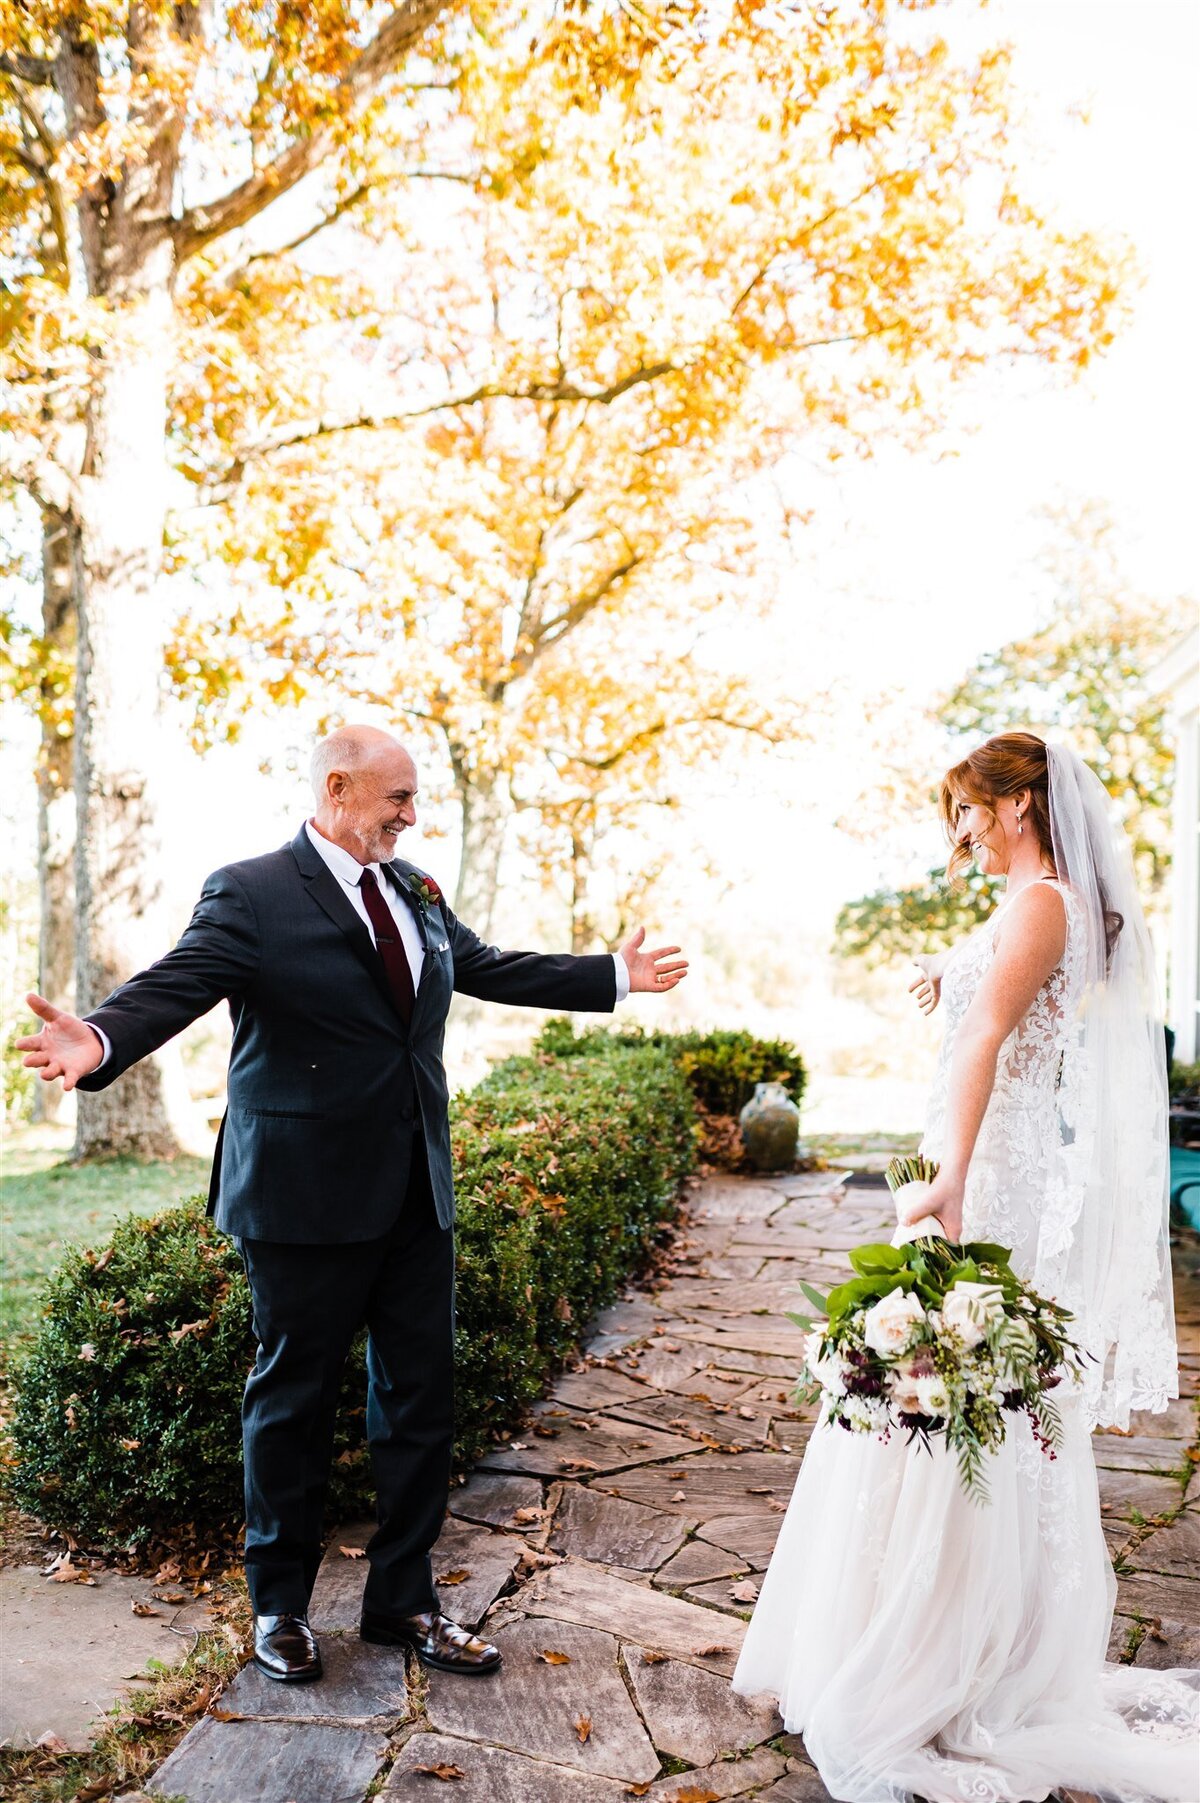 first look between father of the bride and bride at Richmond wedding venues patio space with father holdin gout his arms in excitement while the bride smiles and shows her dress to her dad for a sentimental and candid wedding photo